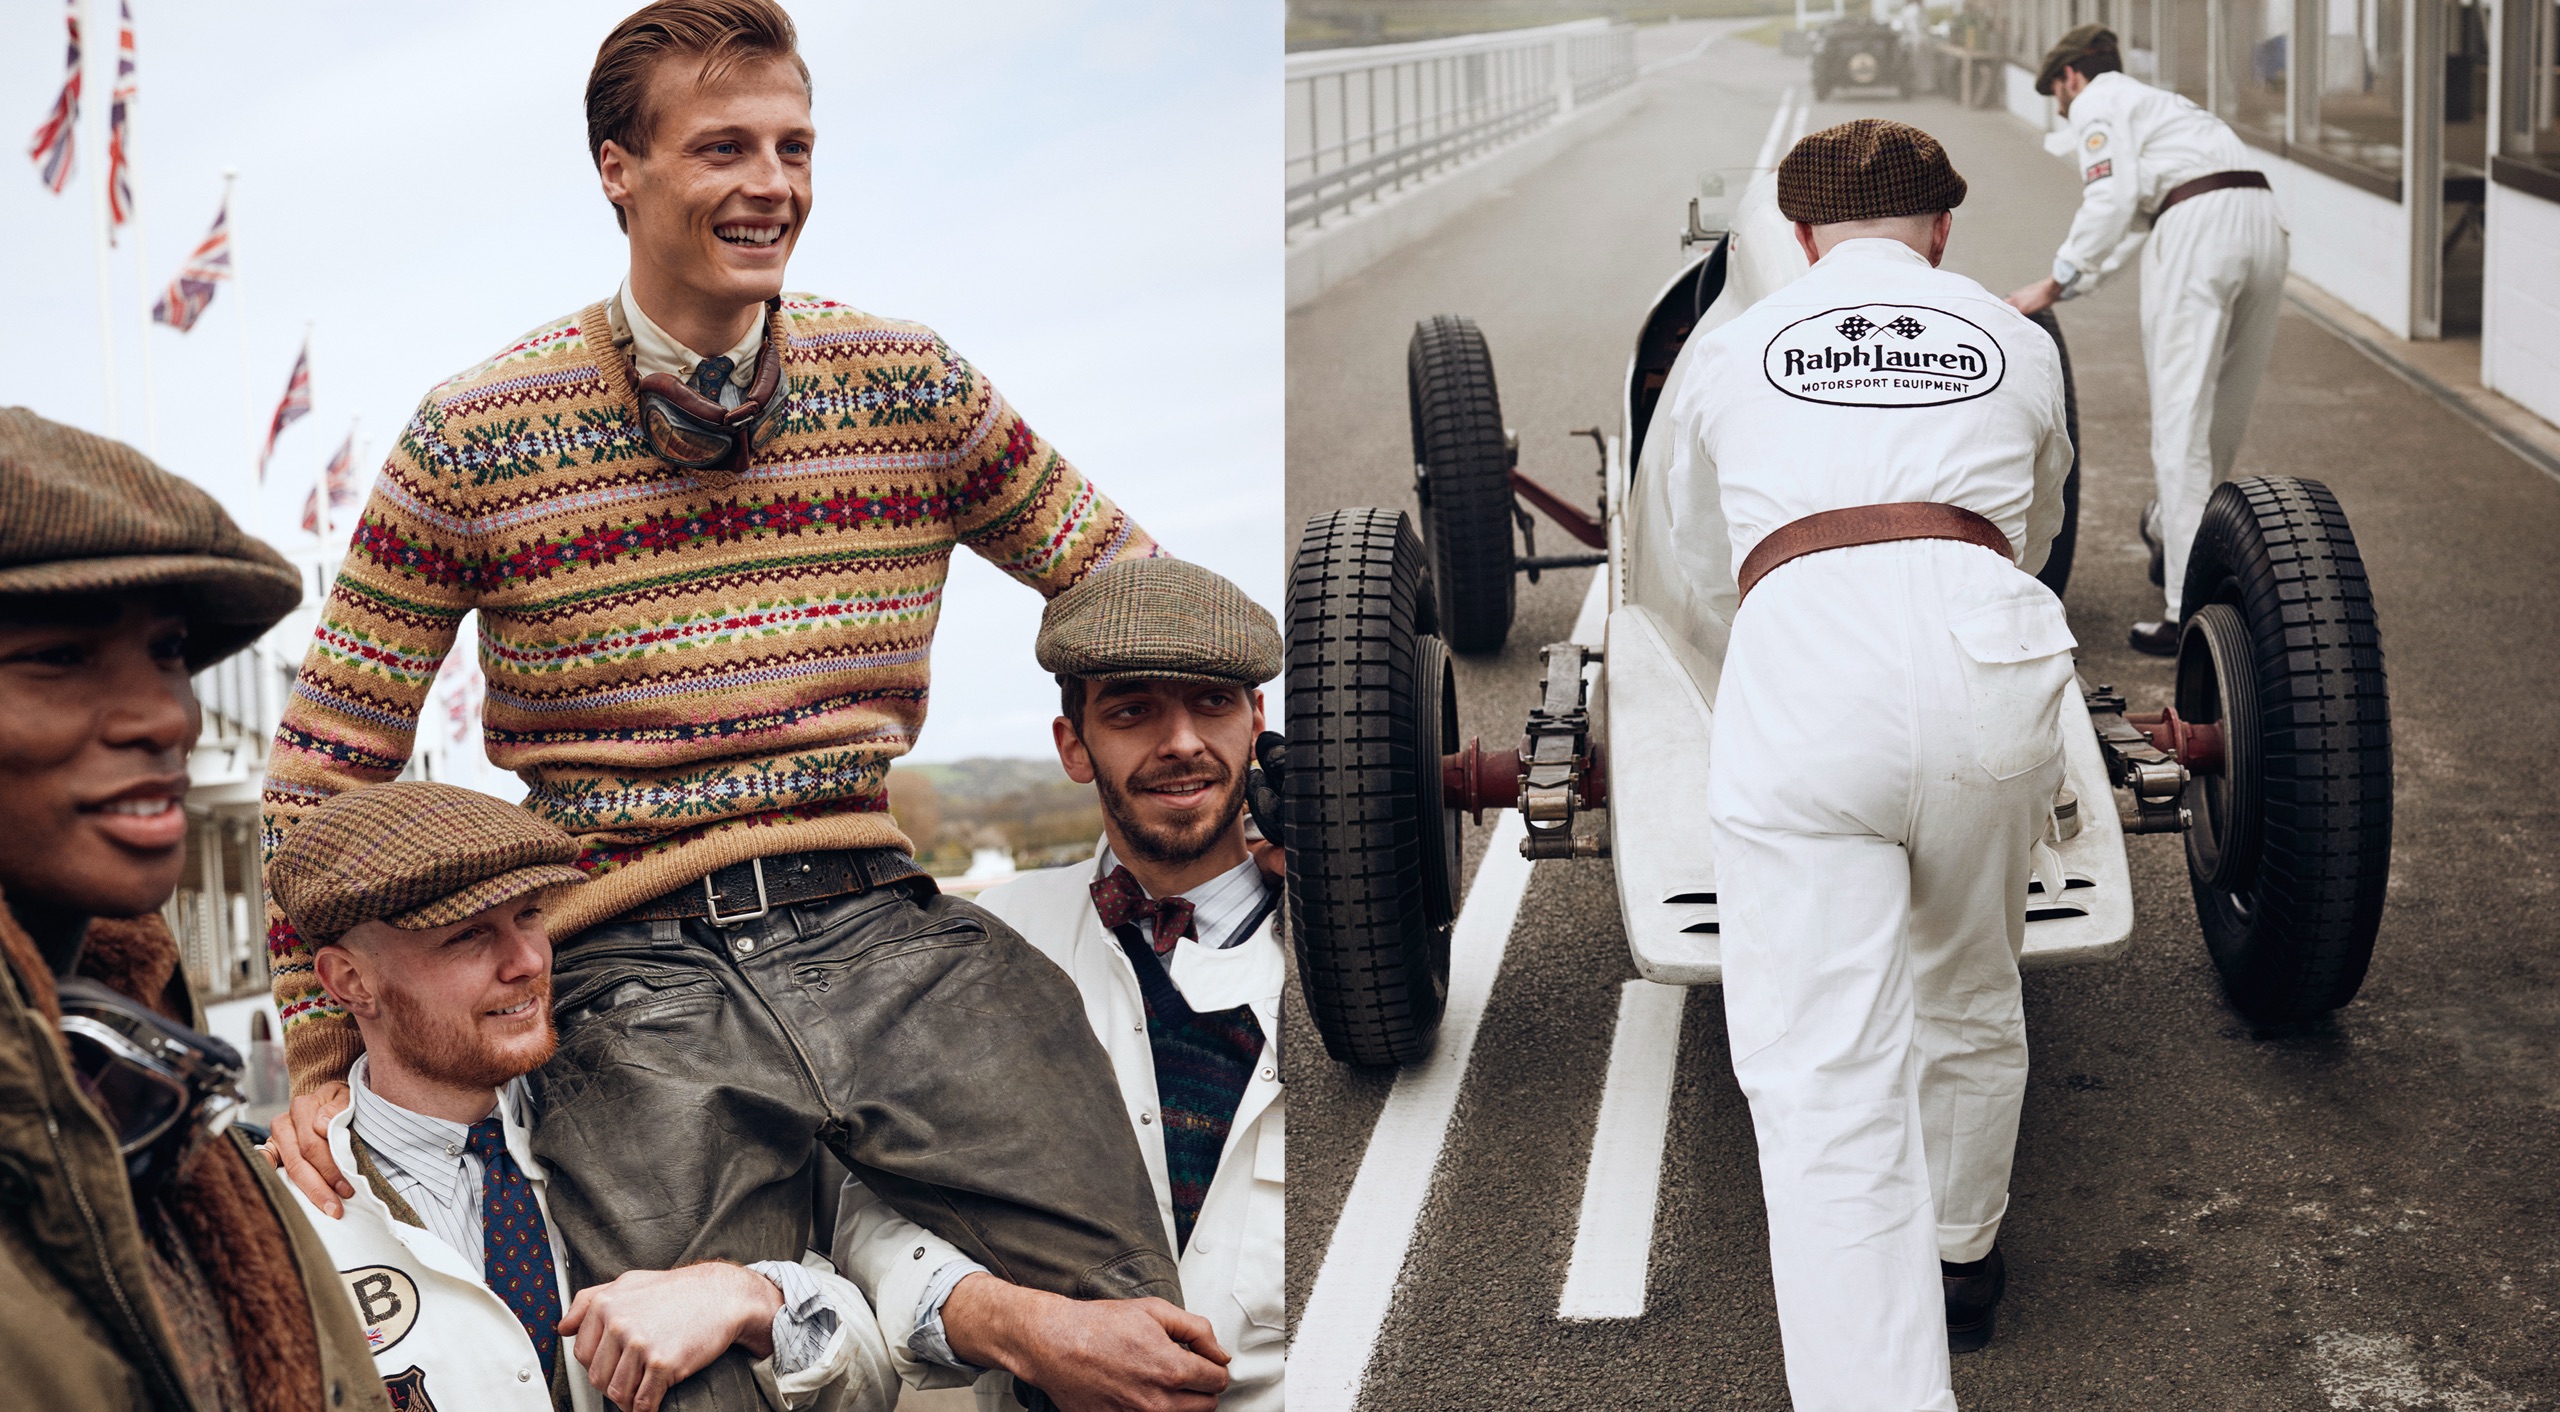 <strong>ON LOCATION</strong><br/><span>This season of Polo Originals, inspired by the golden era of Grand Prix car racing, was photographed at the Goodwood Motor Circuit, which is located in West Sussex, on the 12,000-acre Goodwood Estate. The Circuit has since become known for hosting a number of prestigious motorsport events, including the famous Festival of Speed and Revival.</span> <br/><rlmag_link href="https://www.ralphlauren.global/tm/en/search?cgid=brands-prl-tough-and-refined-cg"><button class="shop-collection">Shop the Story</button></rlmag_link>